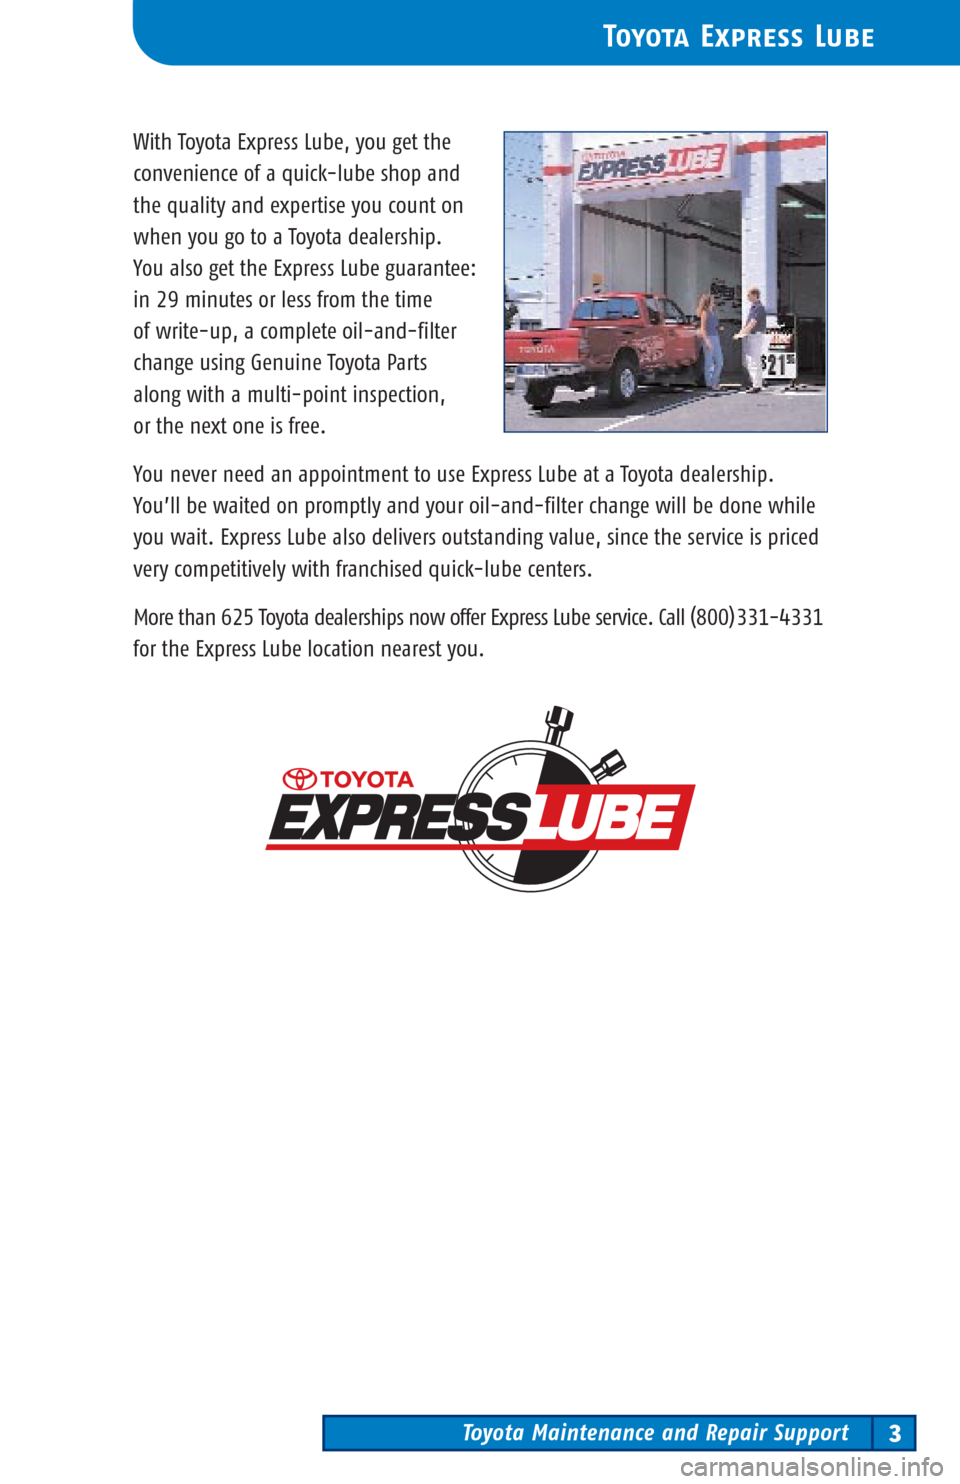 TOYOTA 4RUNNER 2003 N210 / 4.G Scheduled Maintenance Guide Toyota Maintenance and Repair Support3
Toyota Express Lube
With Toyota Express Lube, you get the
convenience of a quick-lube shop and 
the quality and expertise you count on
when you go to a Toyota de